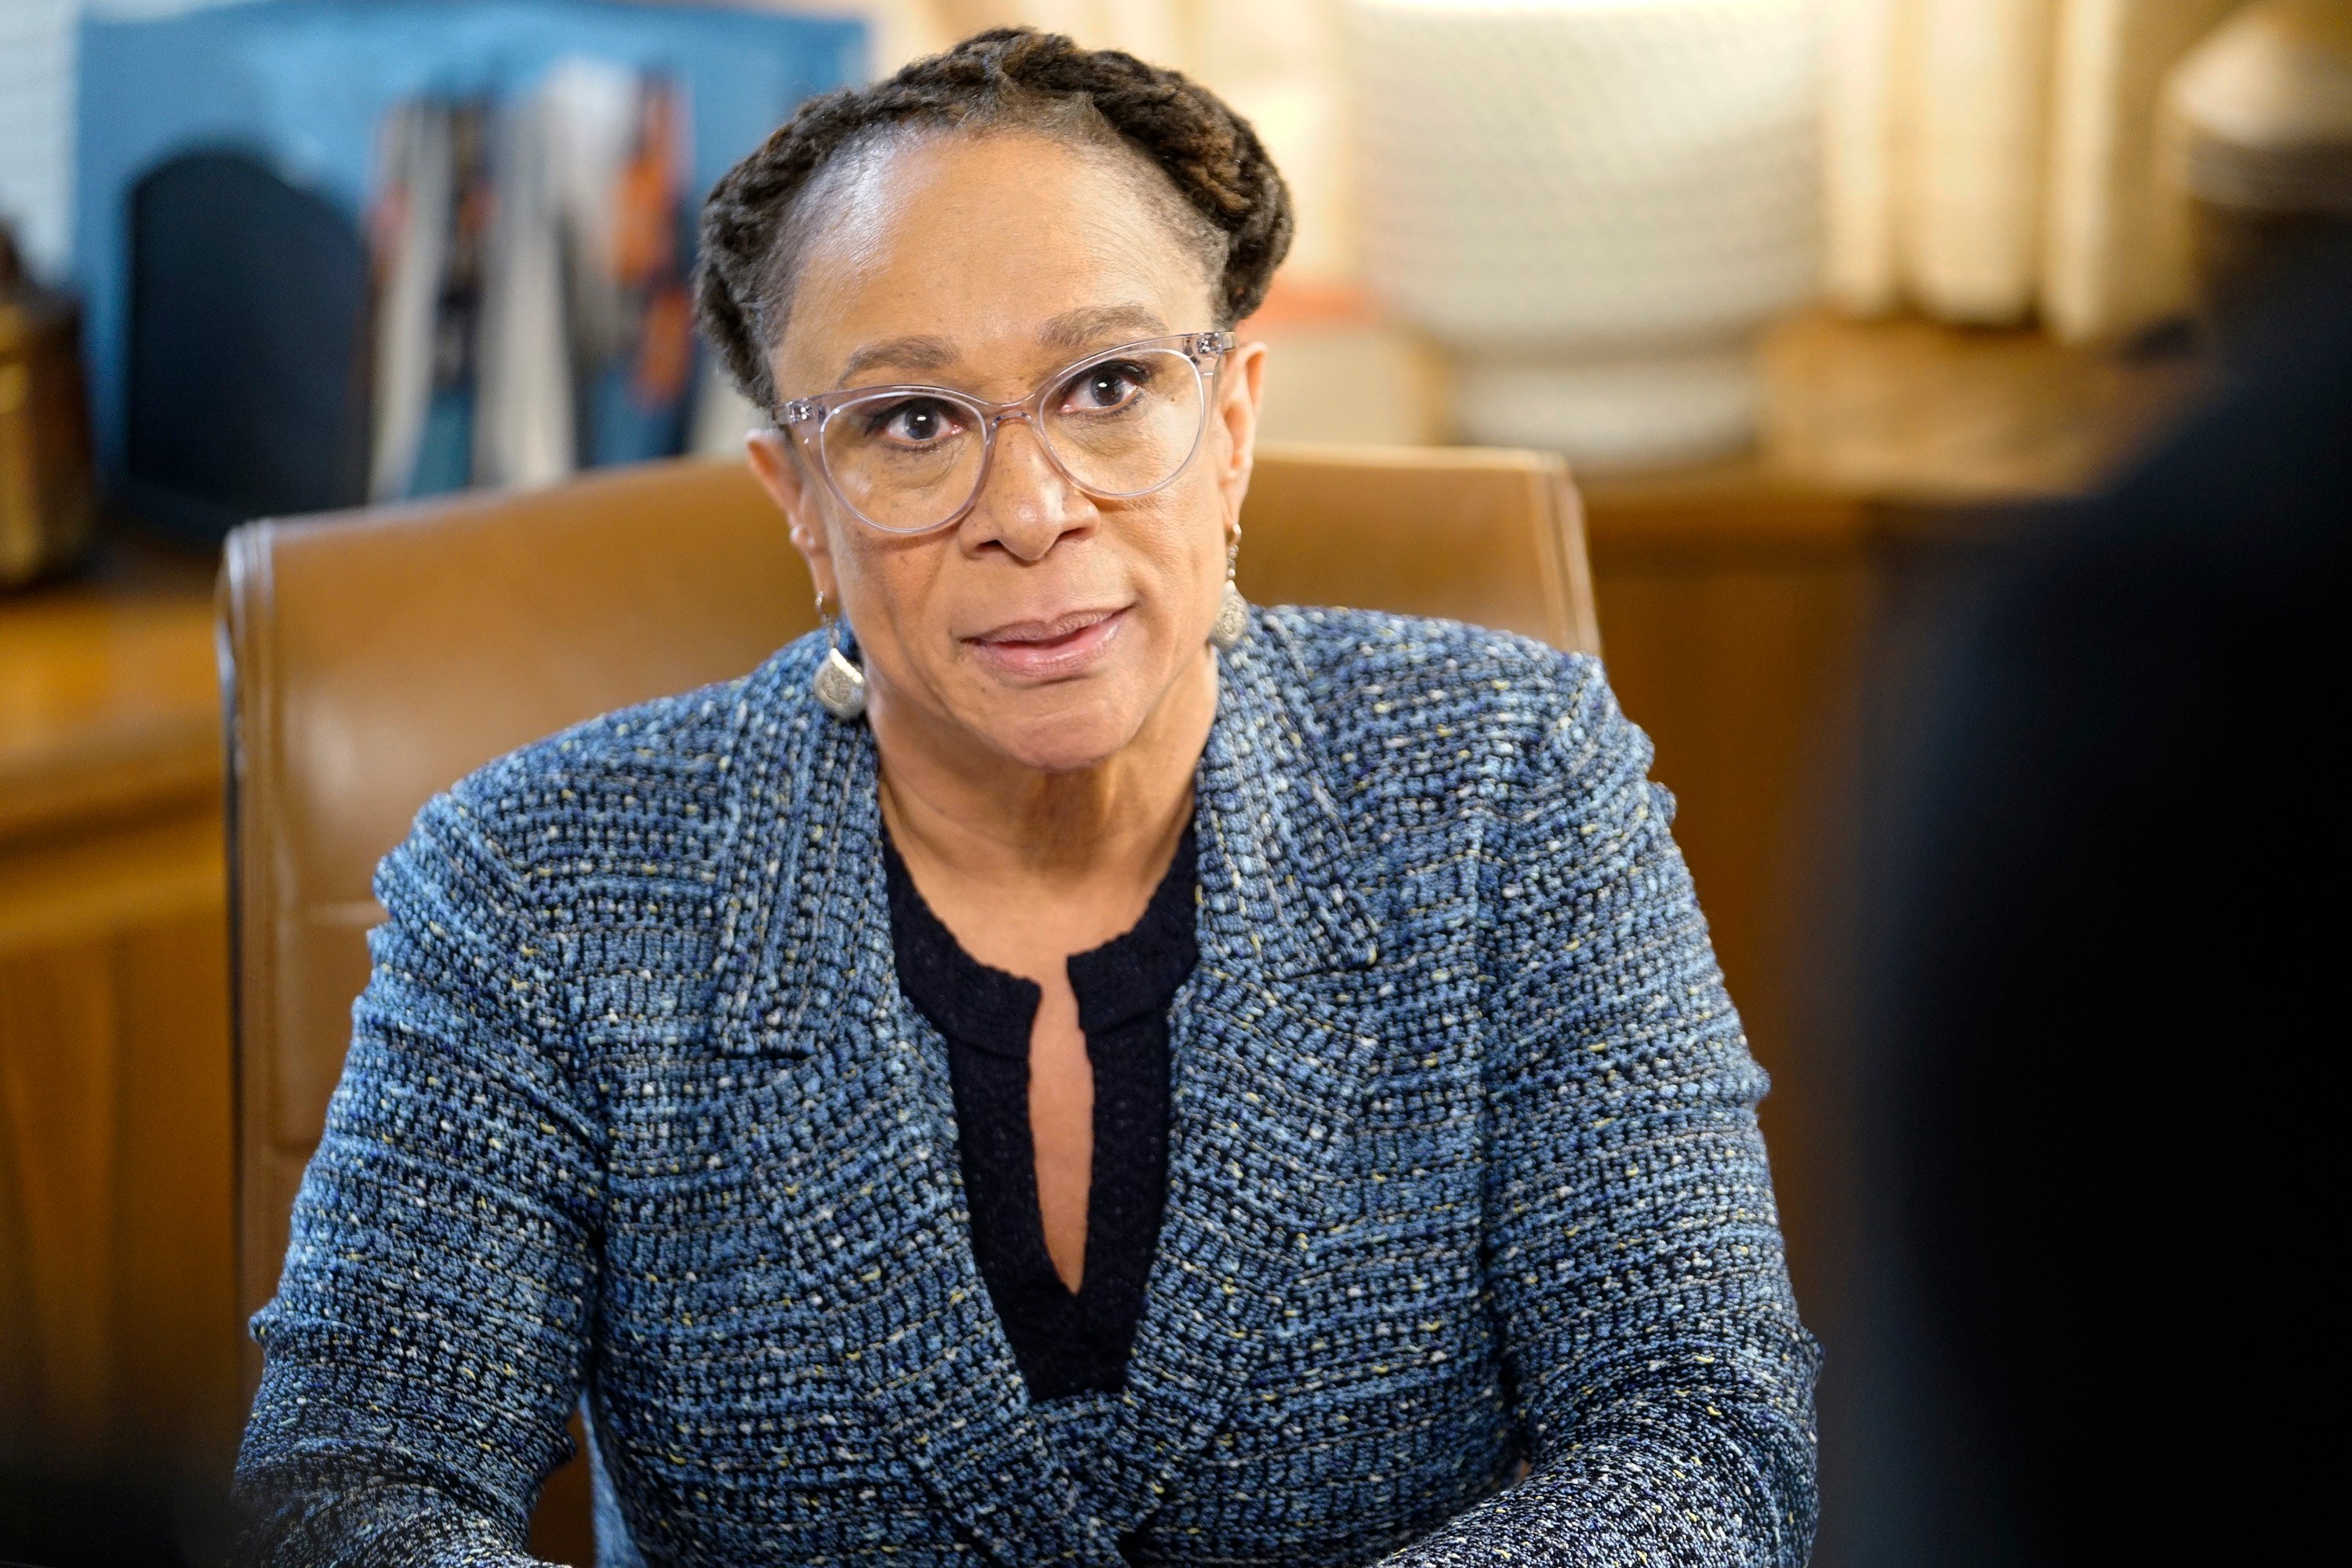 S. Epatha Merkerson as Sharon Goodwin on 'Chicago Med' sitting at a desk, wearing glasses, looking up and away from the camera